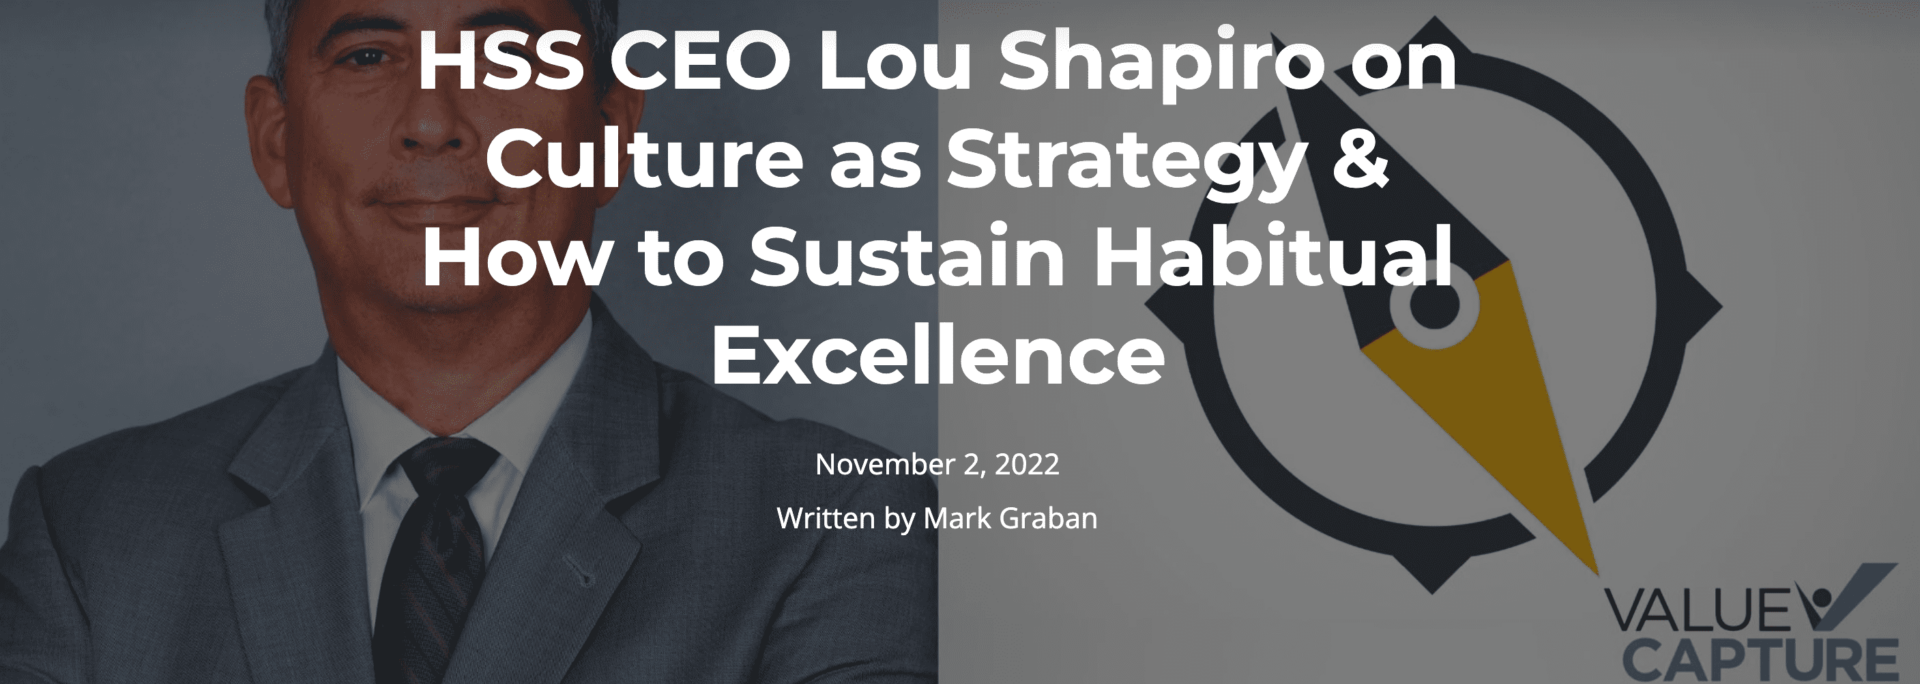 HSS CEO Lou Shapiro on Culture as Strategy & How to Sustain Habitual Excellence - Value Capture